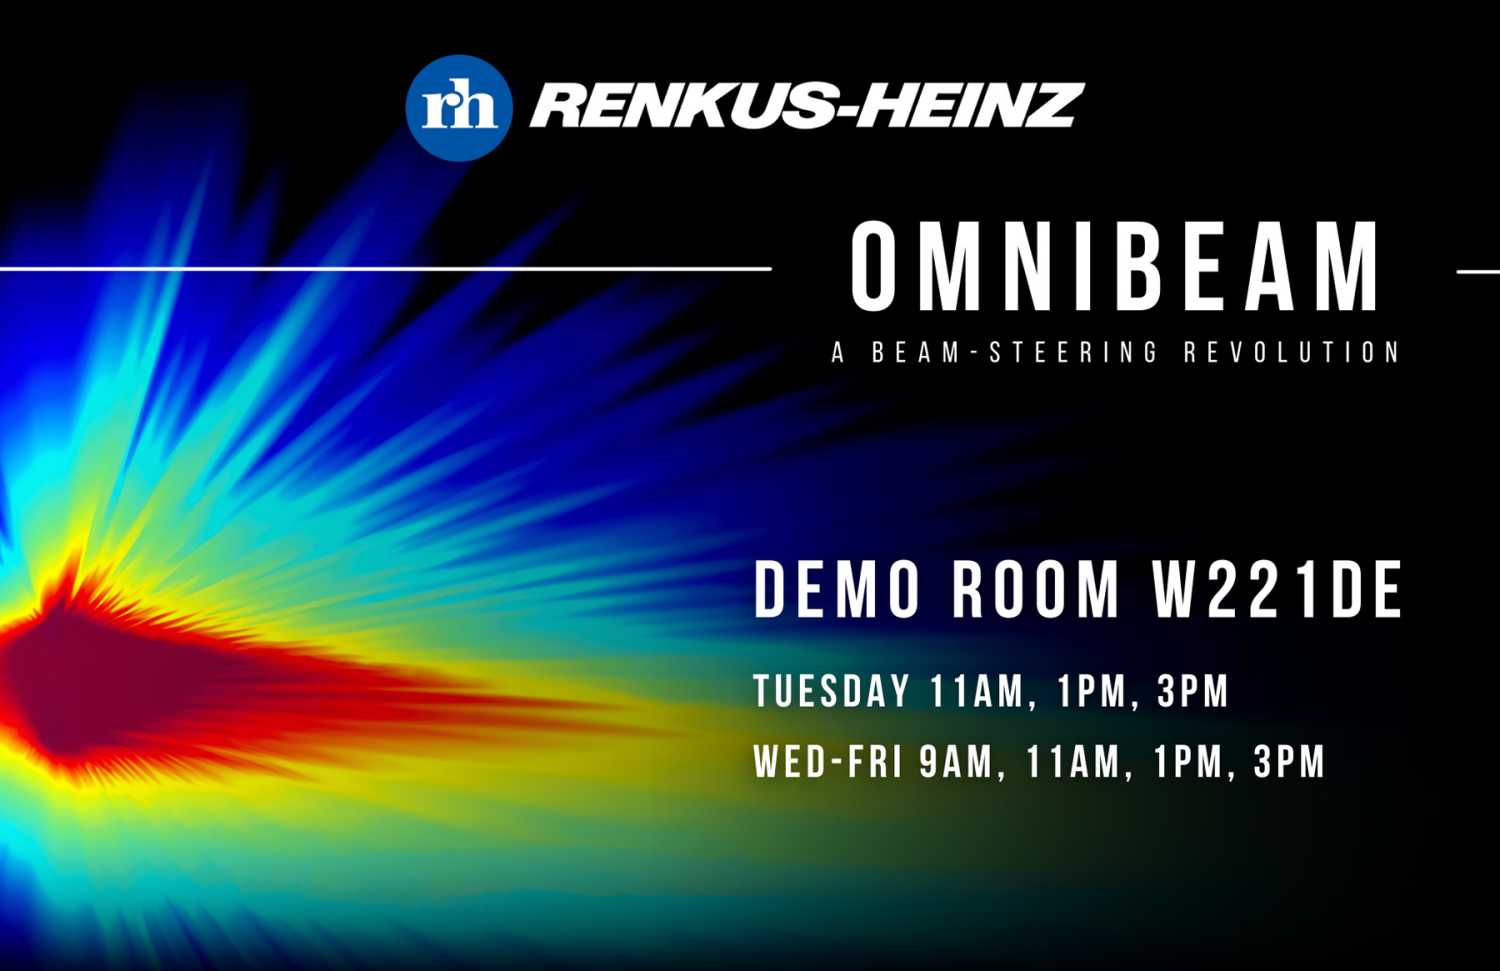 OmniBeam will be on demo in Orlando